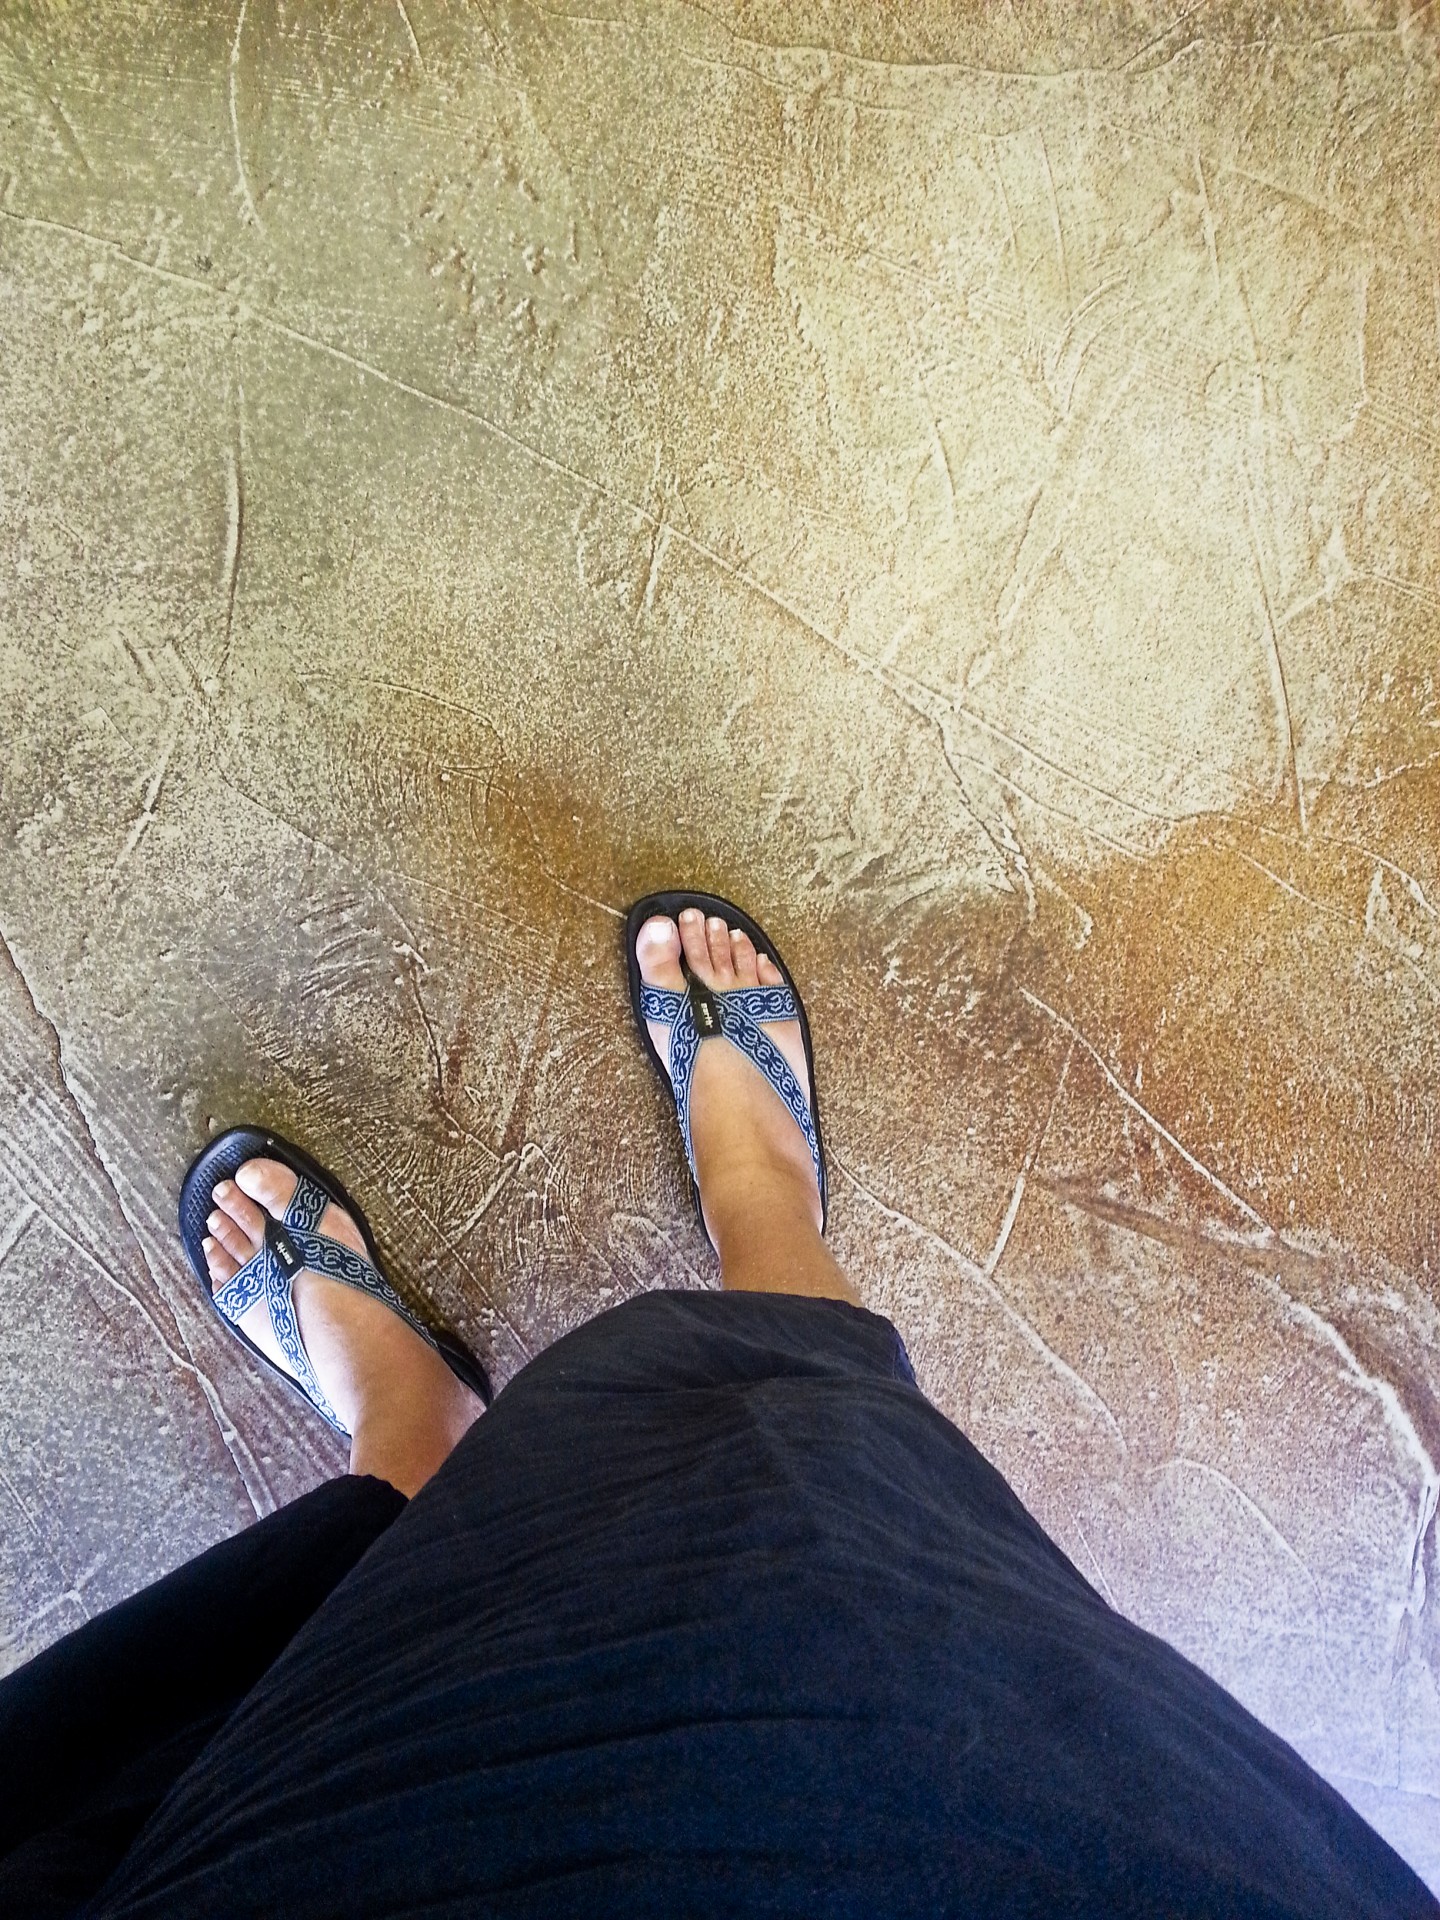 Image of female feet standing and waiting